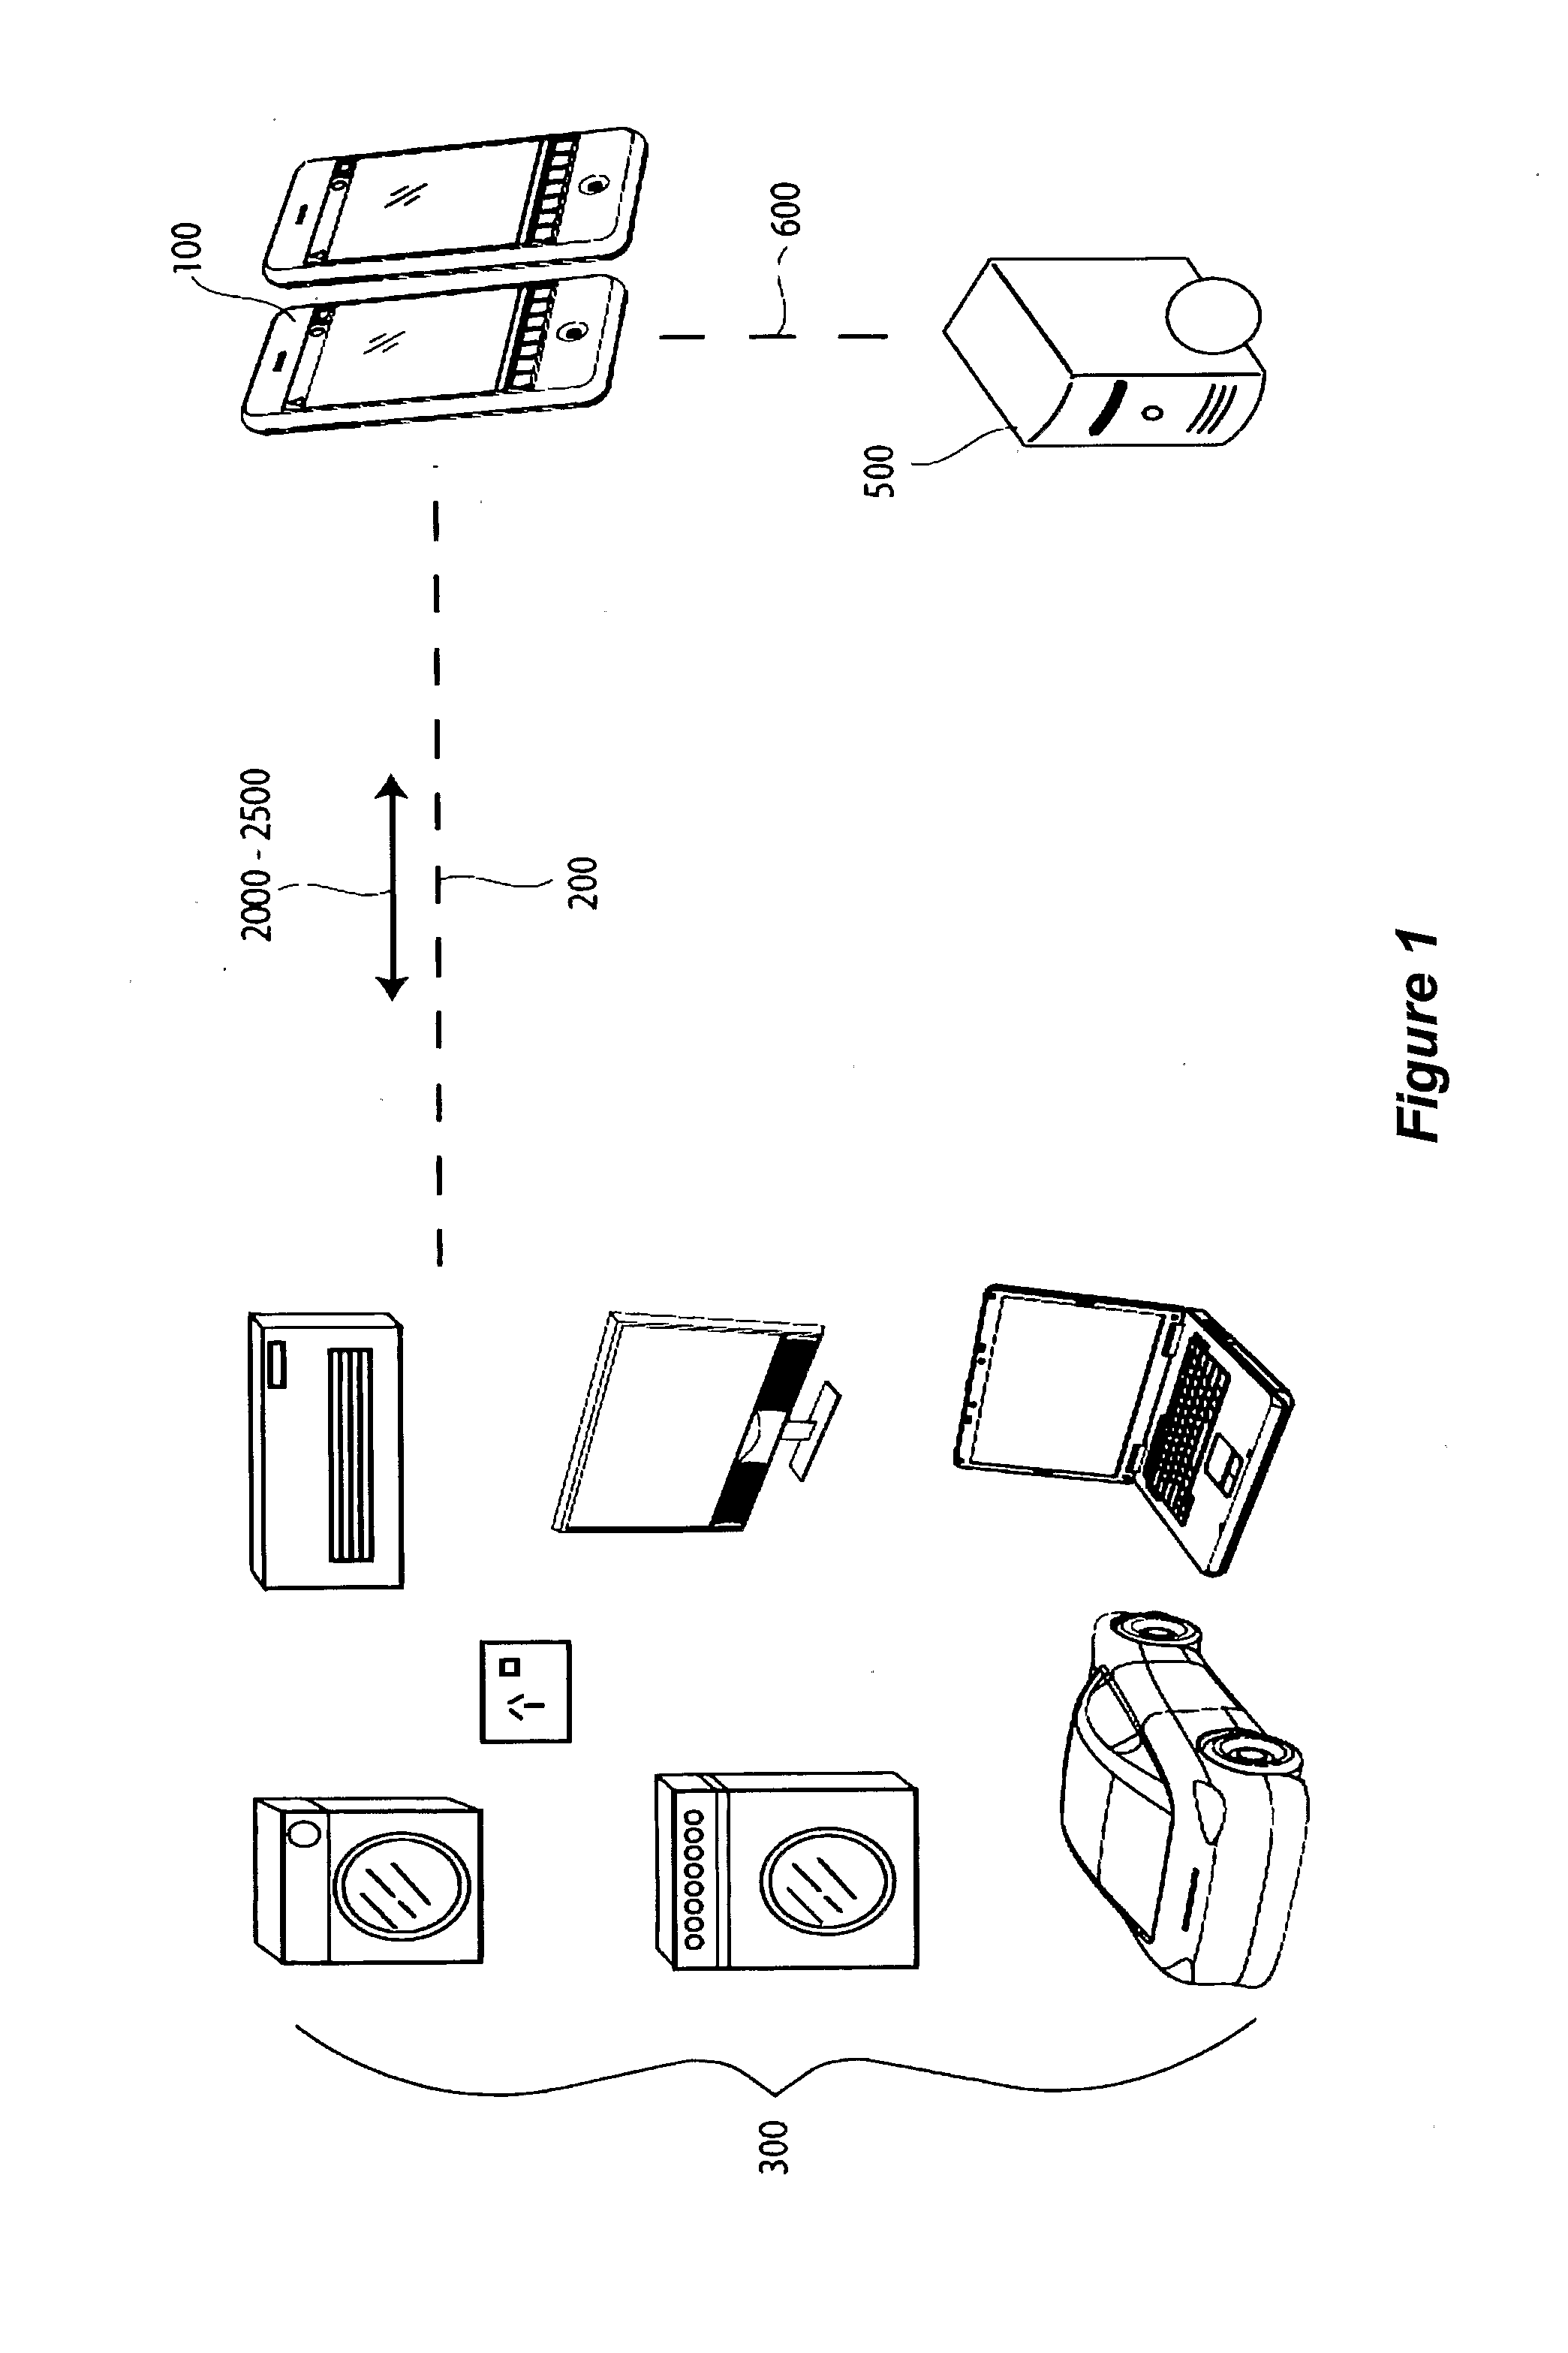 Arrangement for managing wireless communication between devices